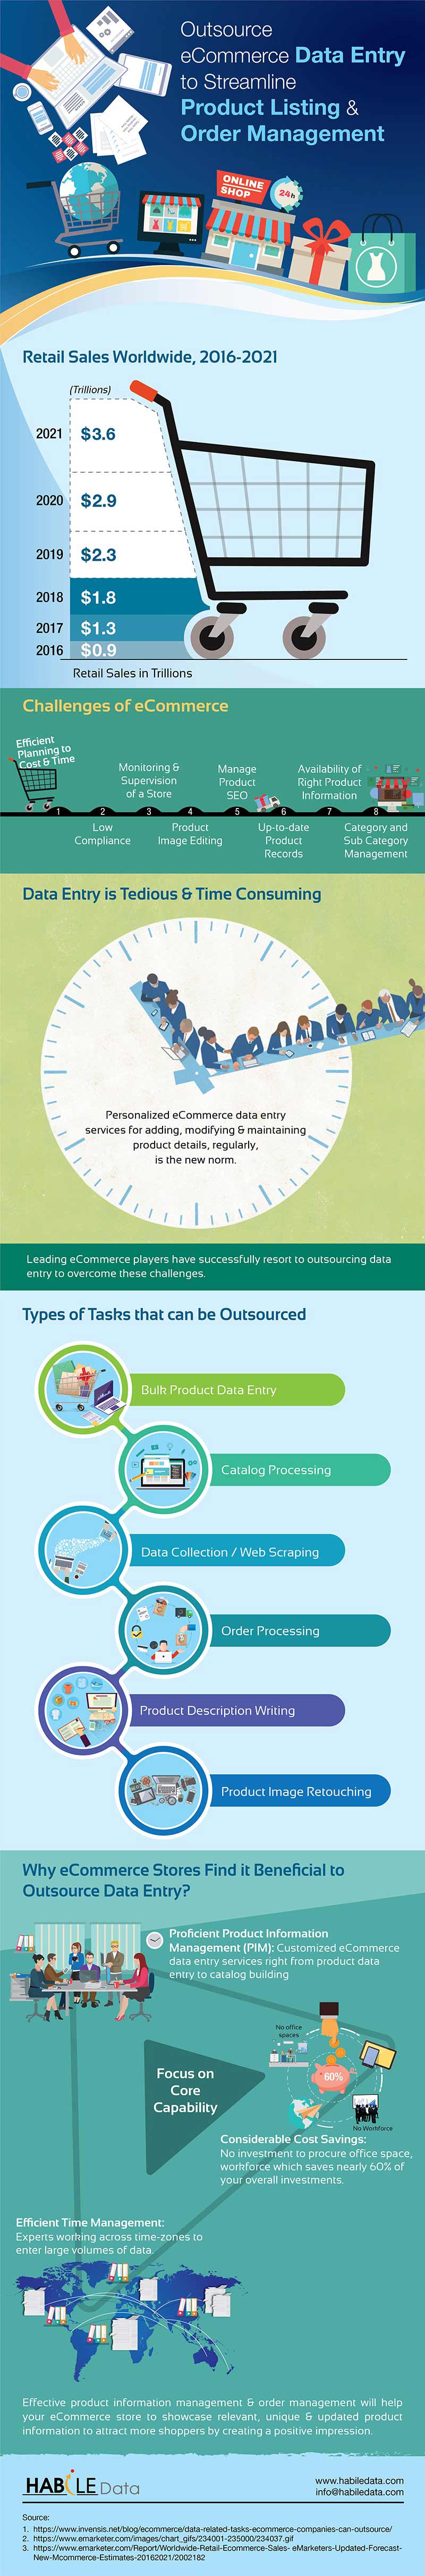 Outsource eCommerce Data Entry to Streamline Product Listing - Infographic